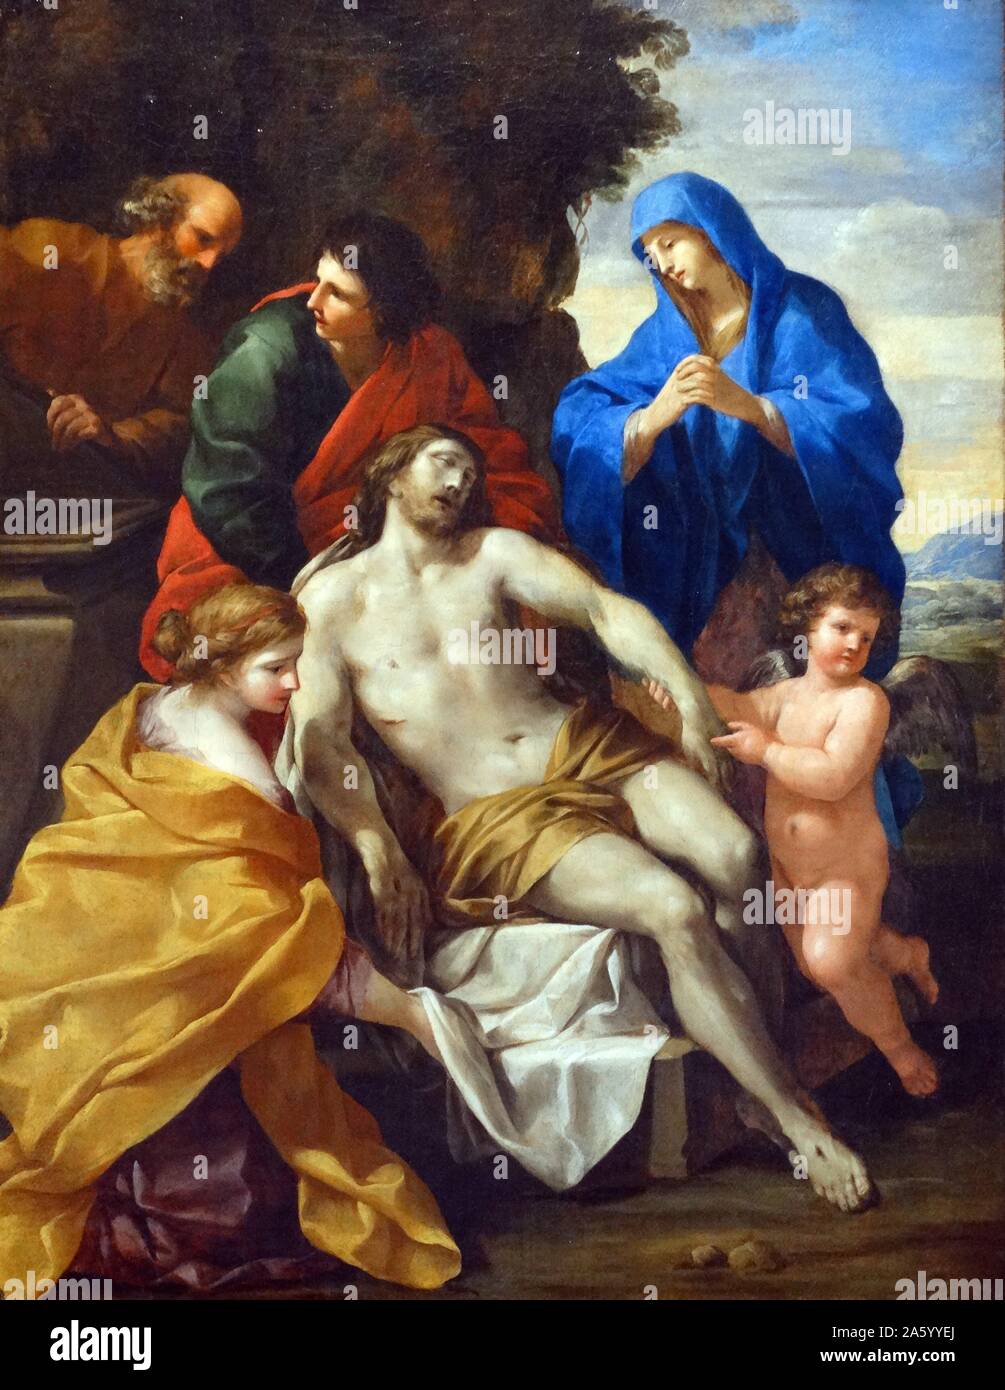 The Entombment by Giovanni Francesco Romanelli (1610-1662). Oil on canvas, c1638. Christ is wrapped in a sheet by the disciples John and Mary Magdalene. Joseph of Arimathaea prepares the stone tomb, Mary watches nearby. Stock Photo